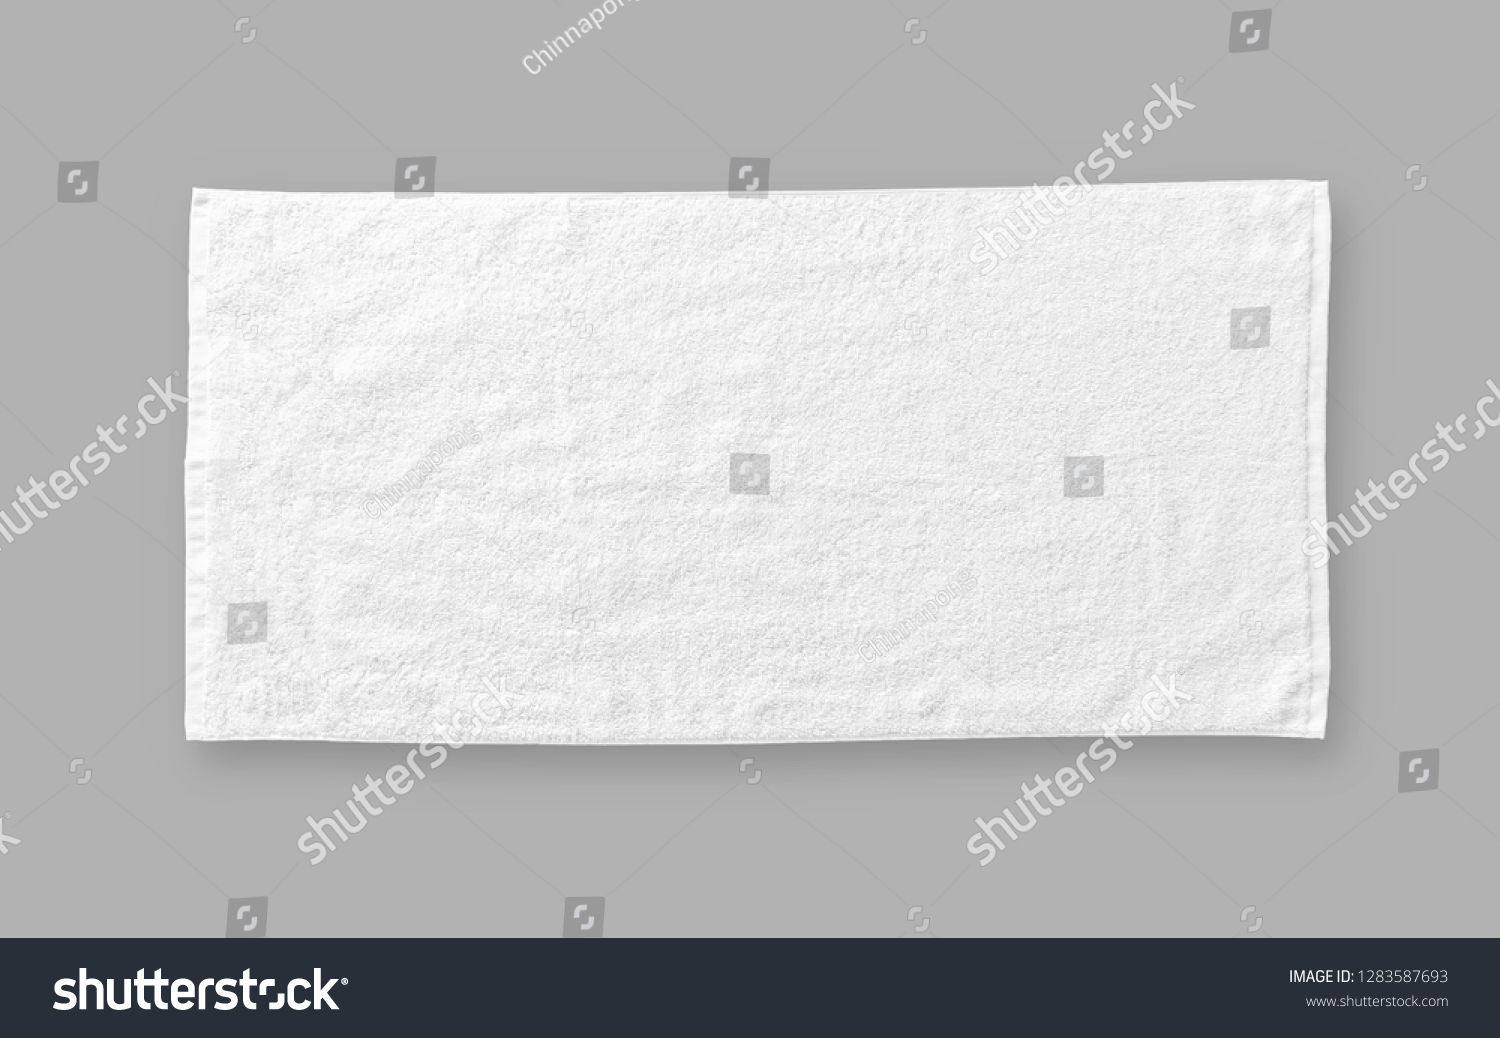 White cotton towel mock up template fabric wiper isolated on grey background with clipping path, flat lay top view  #1283587693